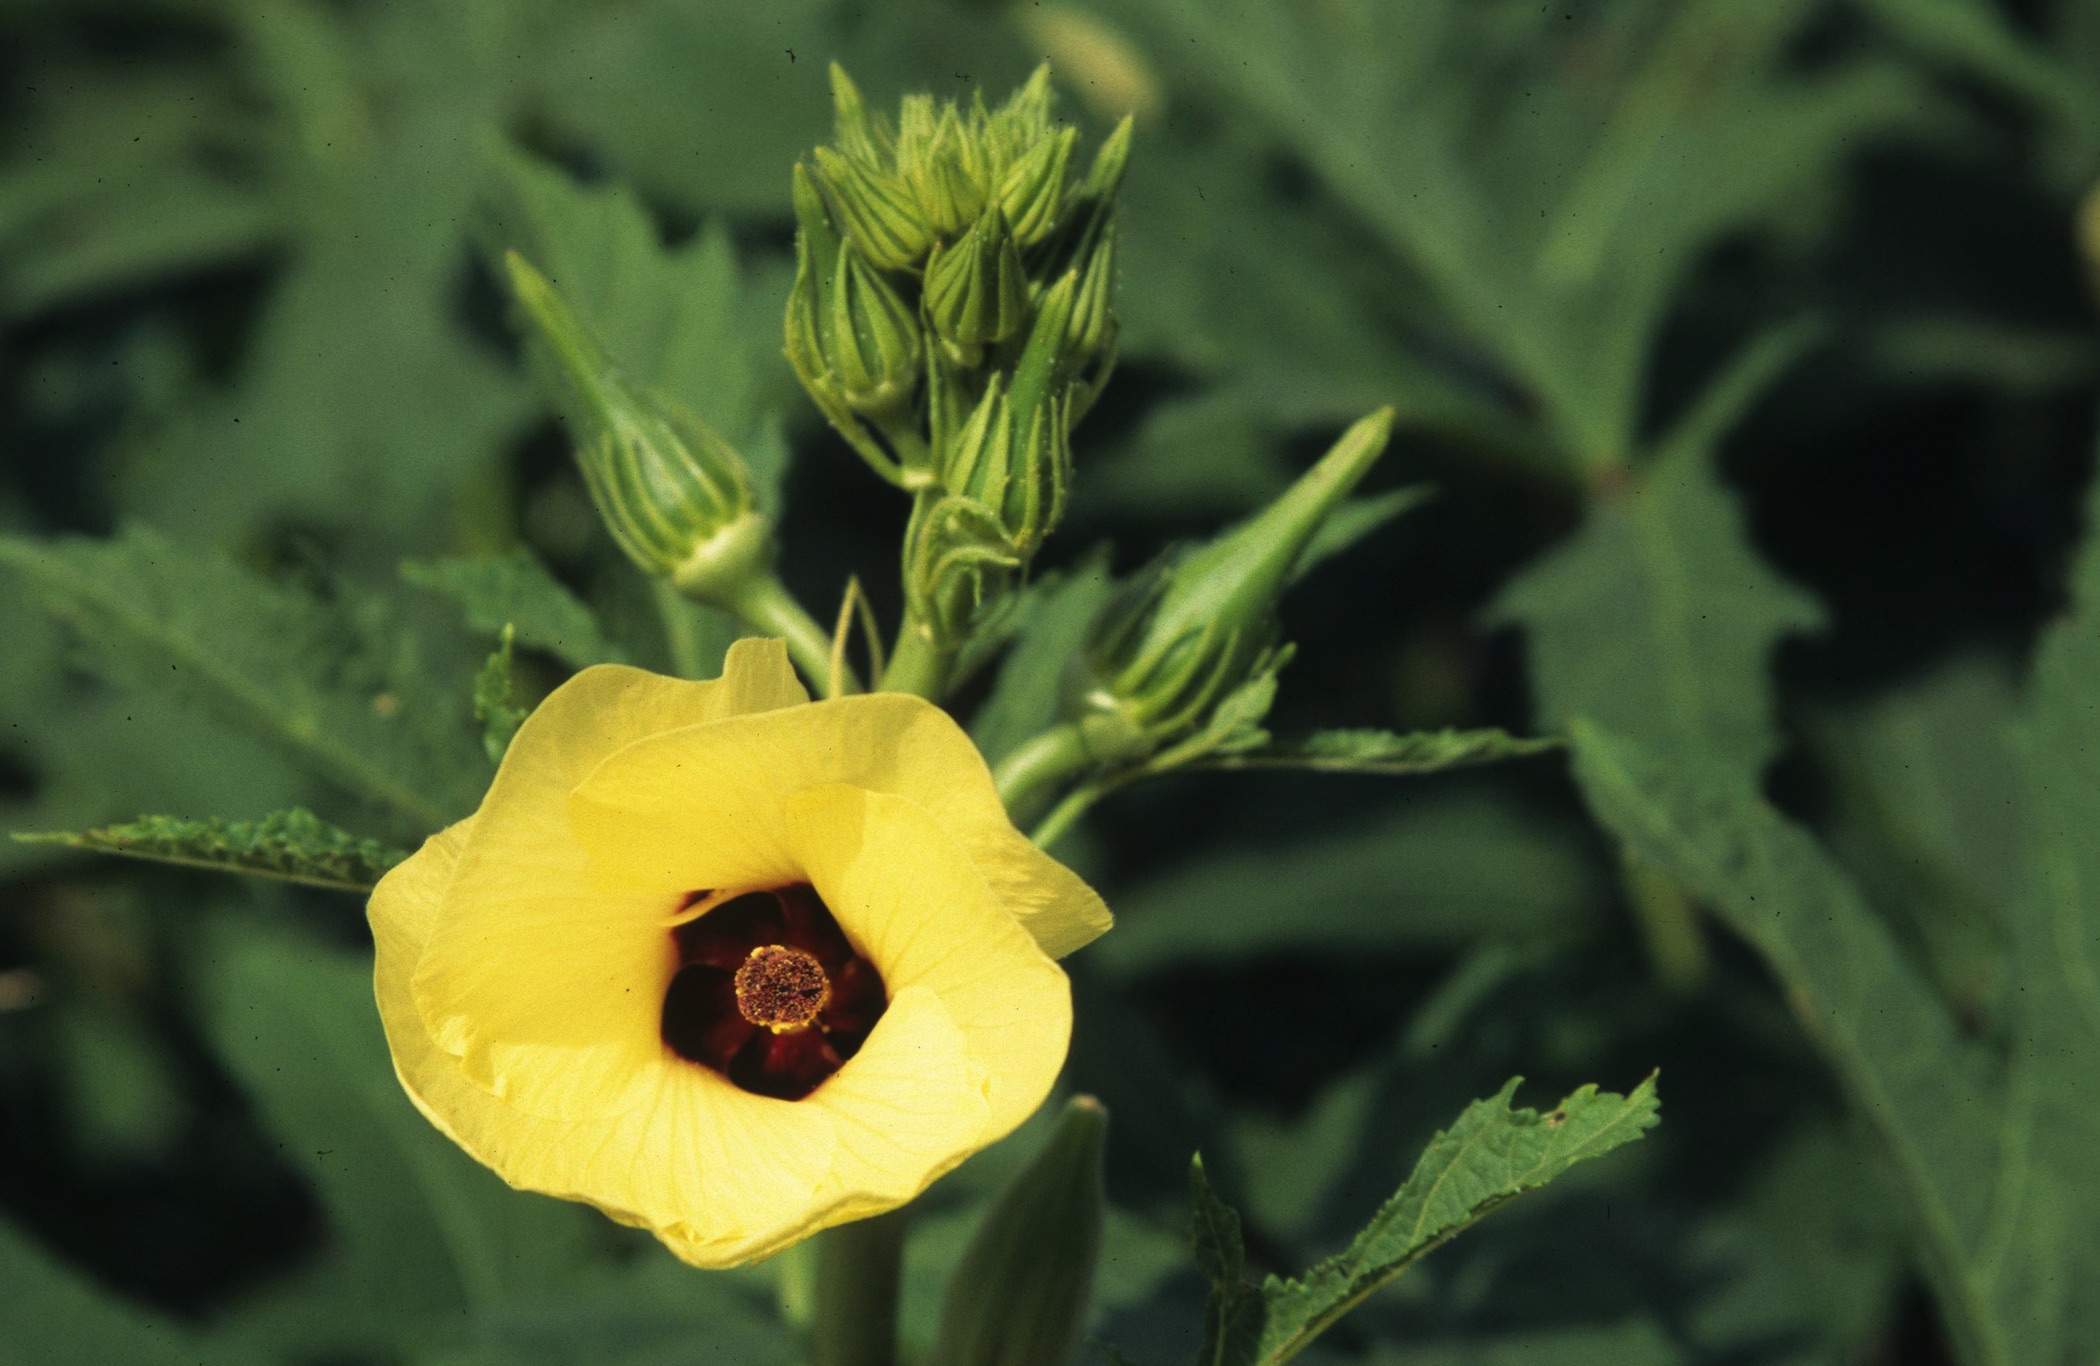 Photo of an okra plant and flower